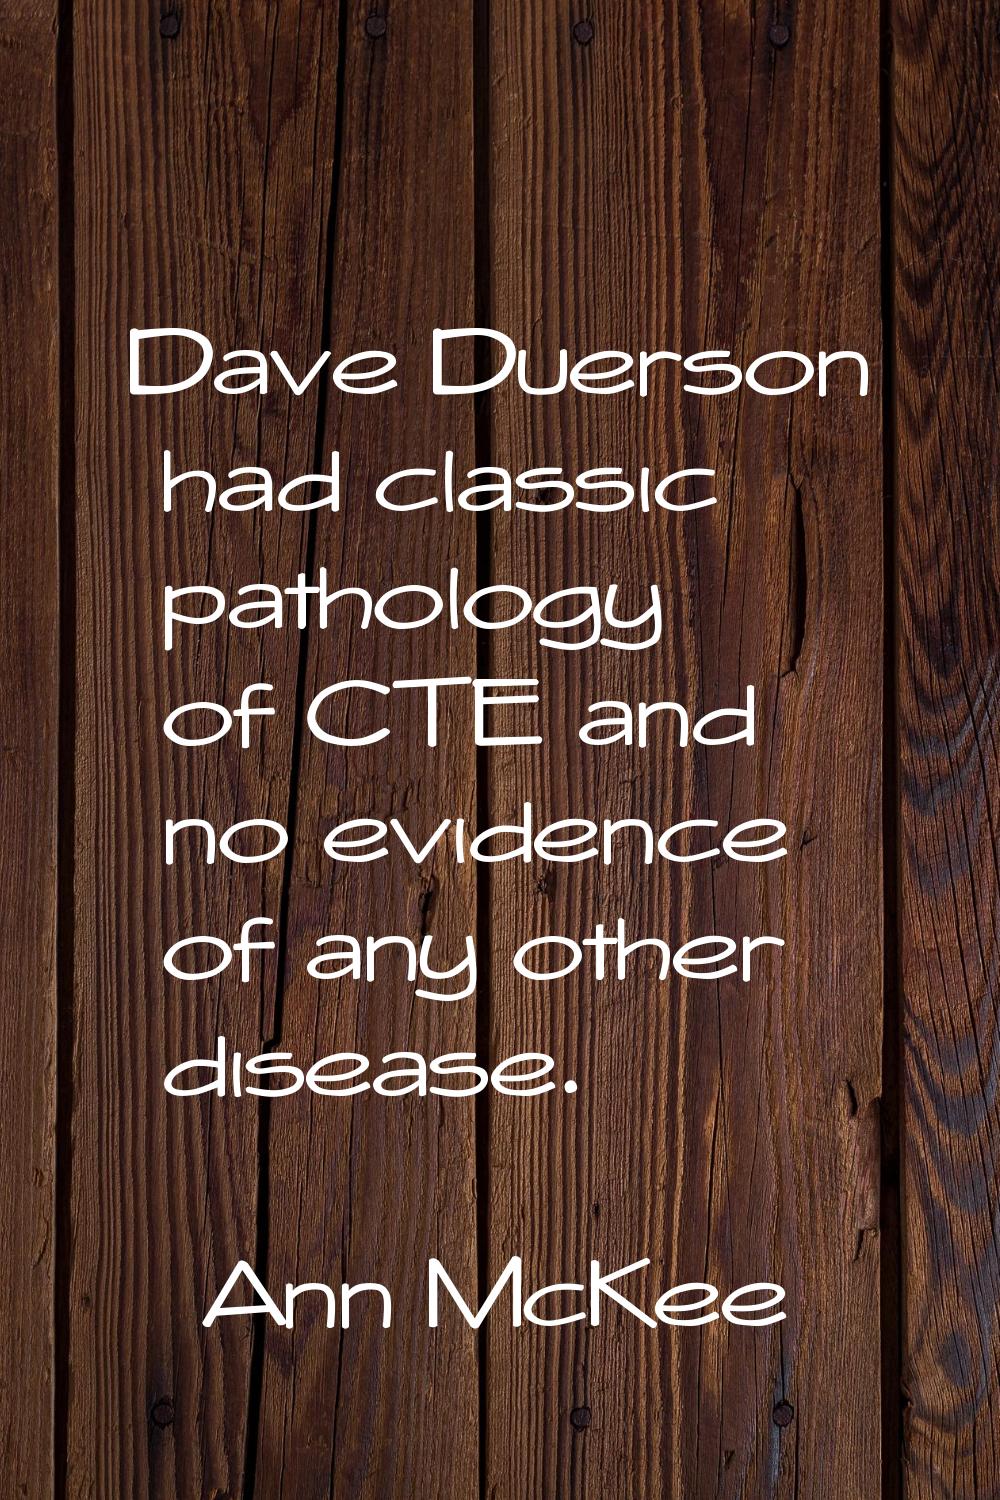 Dave Duerson had classic pathology of CTE and no evidence of any other disease.